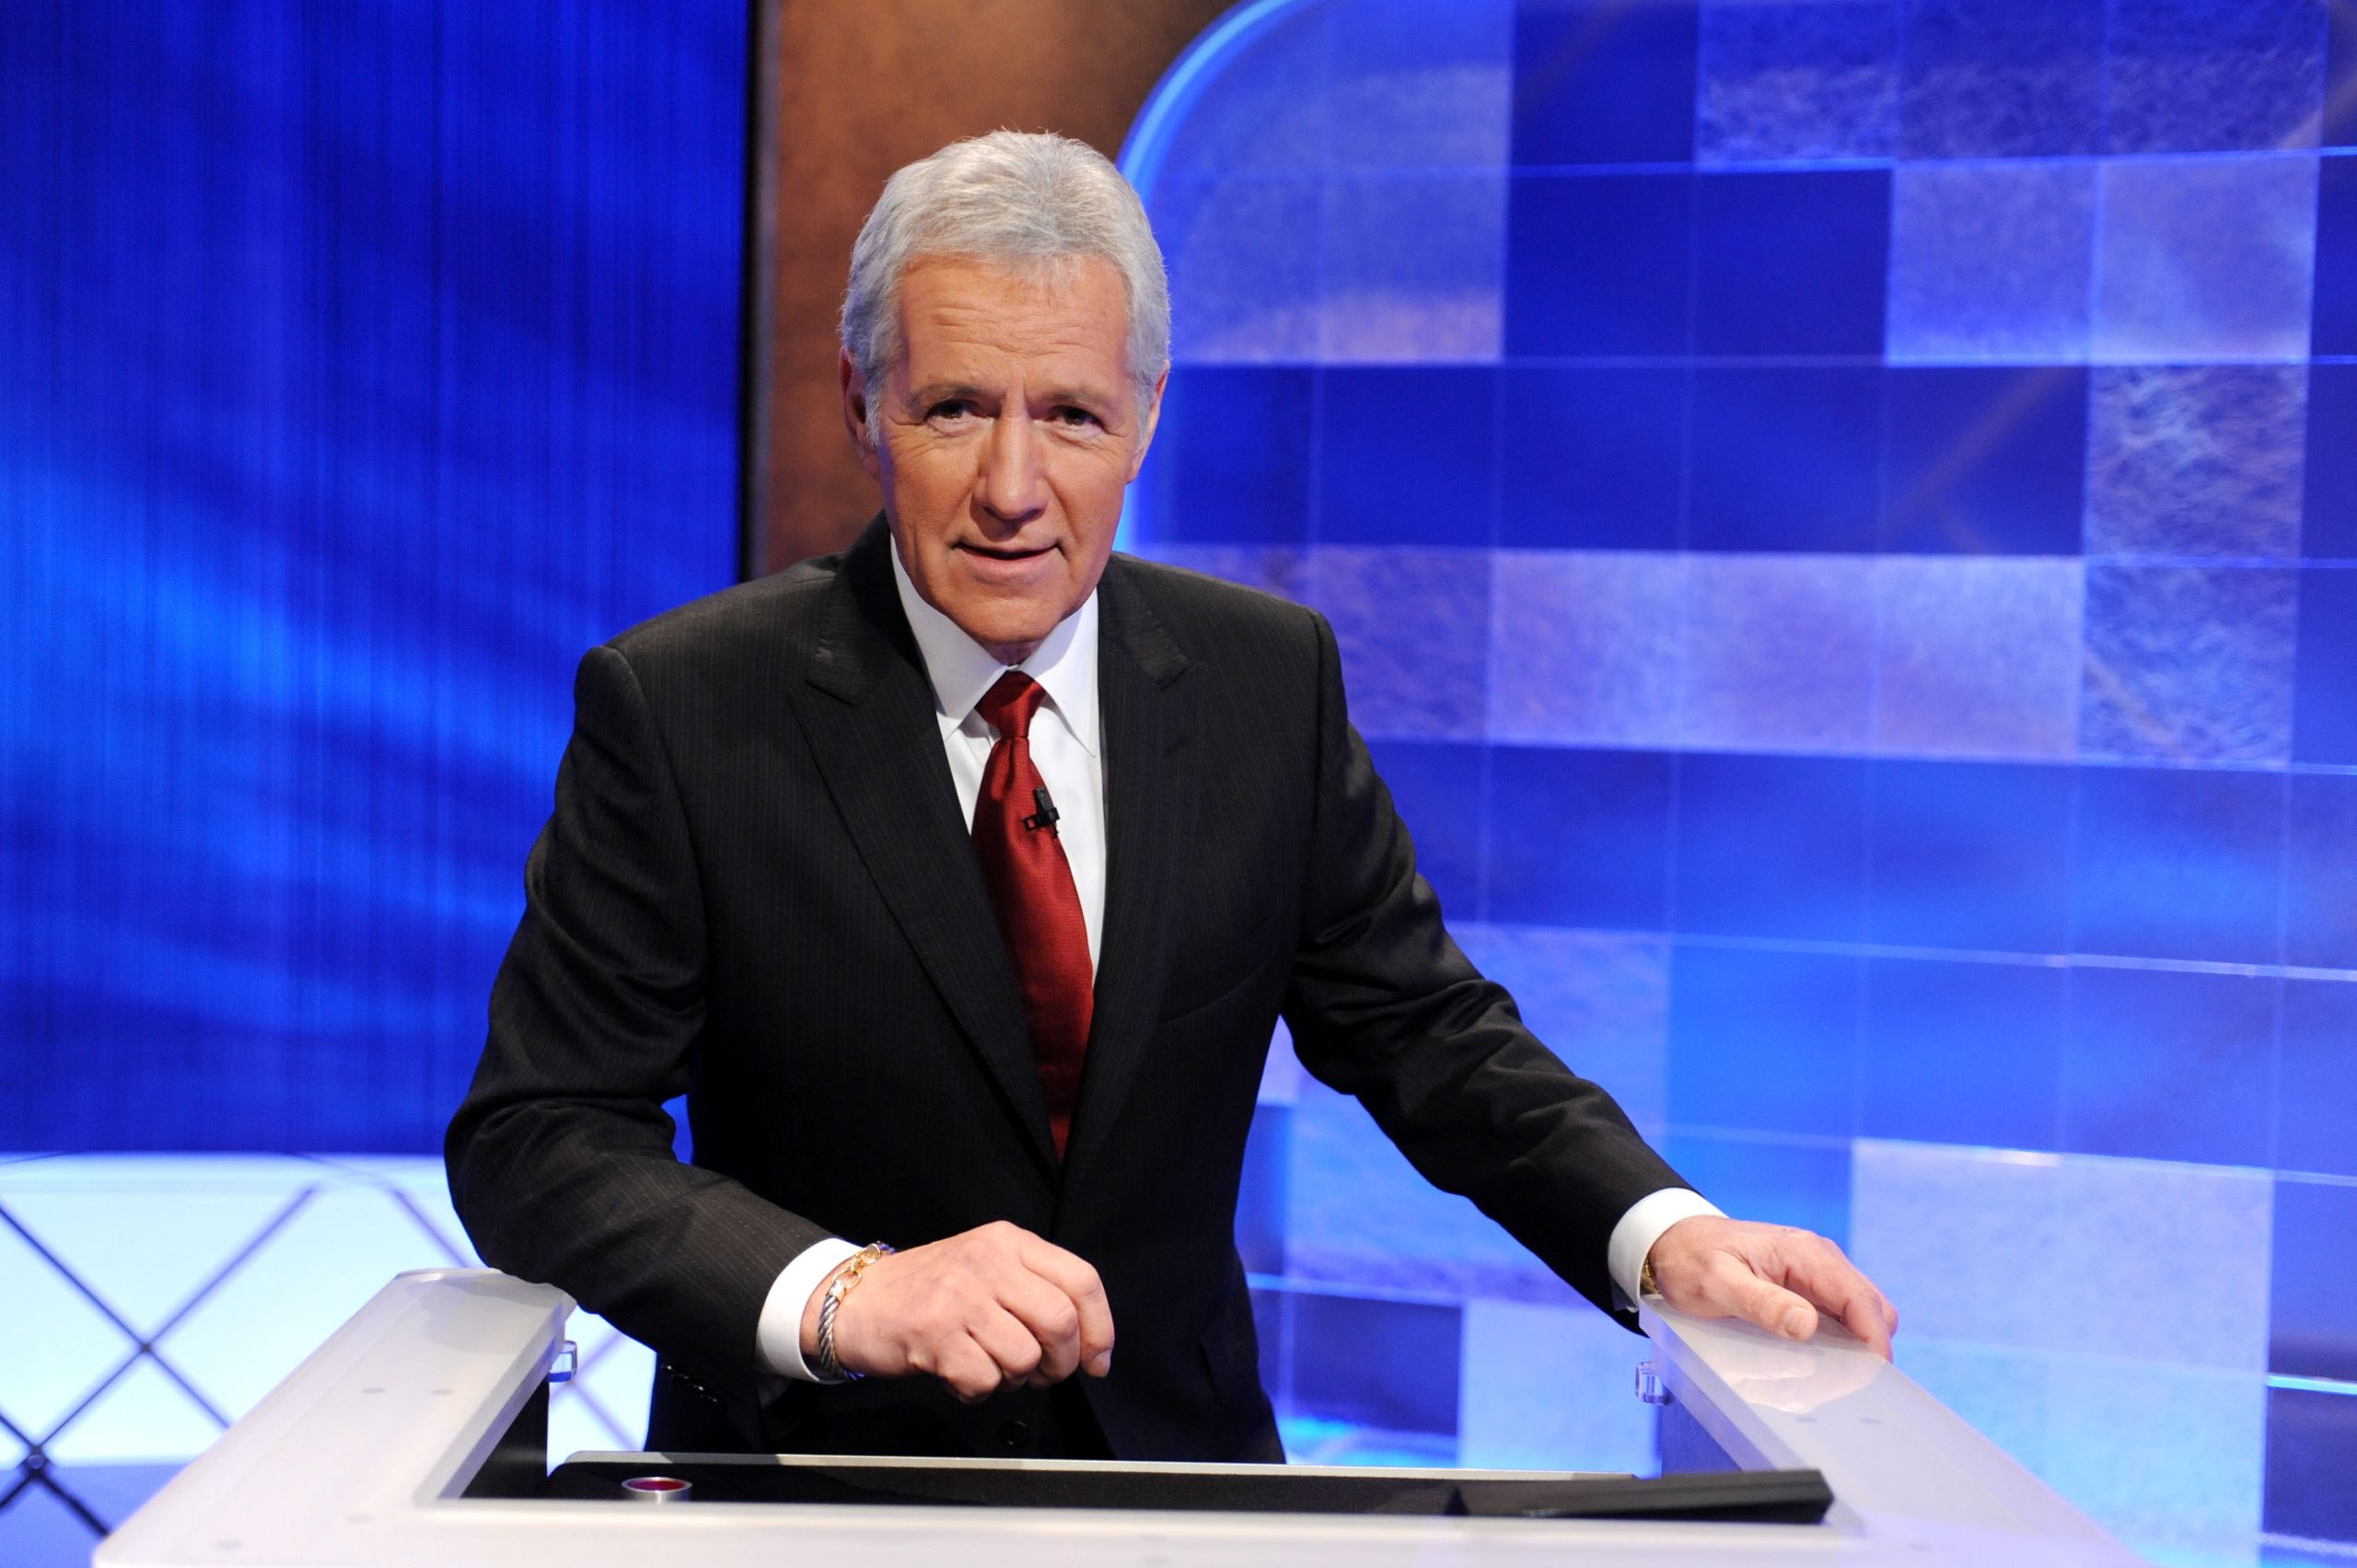 Jeopardy! Producer and Guest Host Mike Richards Pays Tribute to